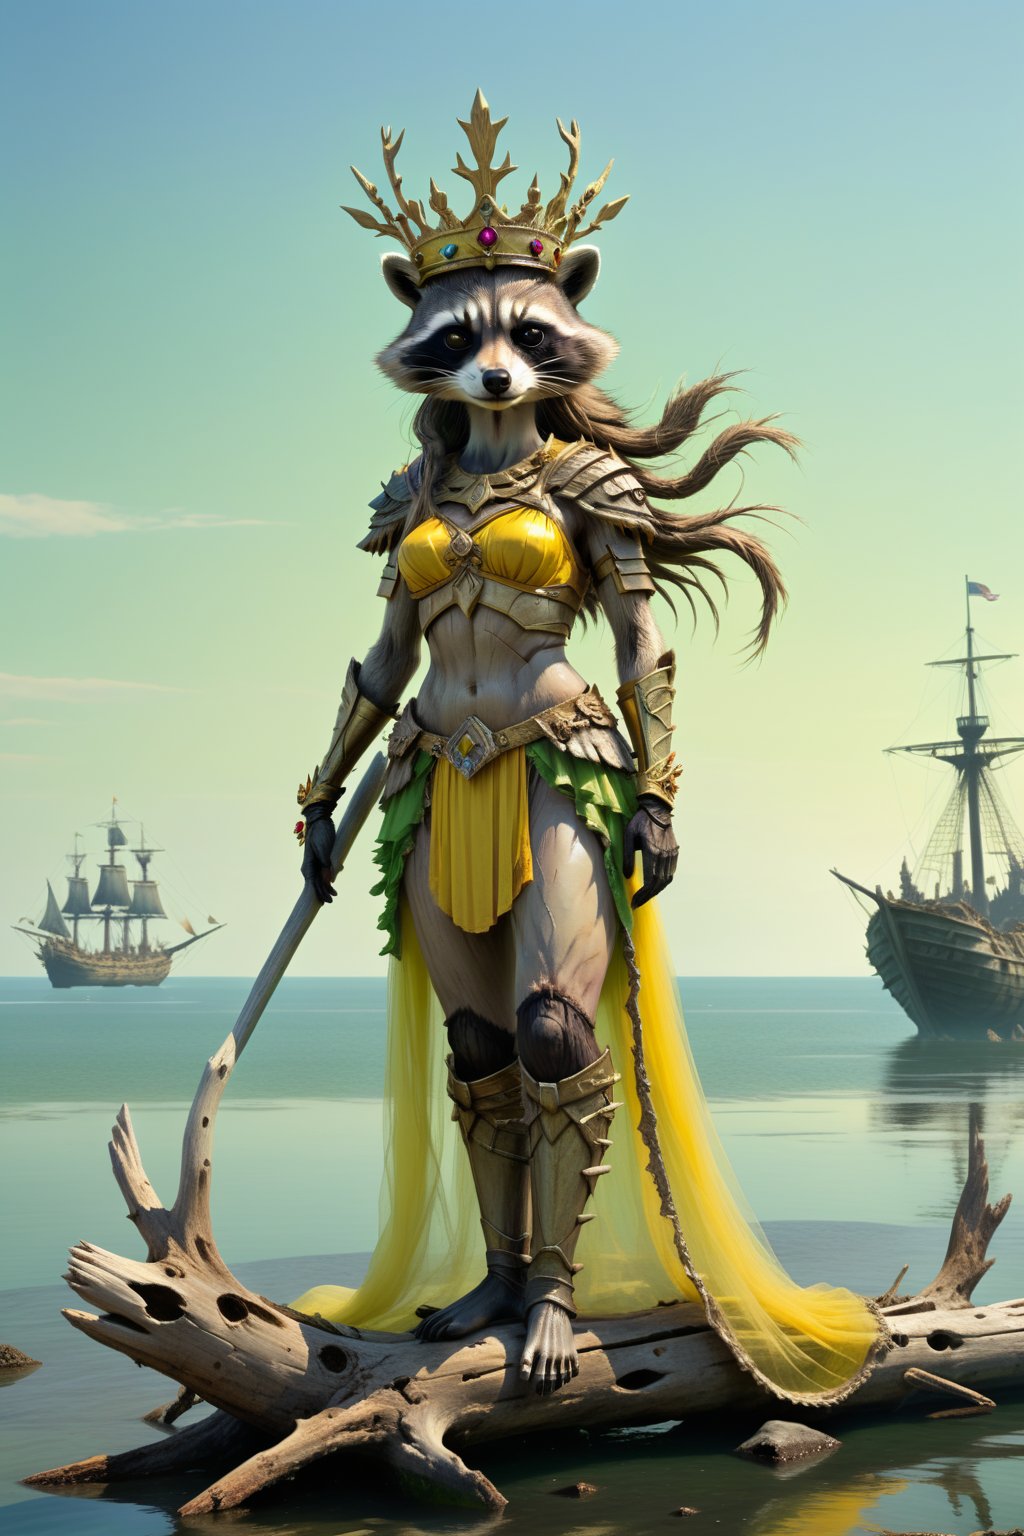 She has the head of a raccoon, wears a crown, and has the slender figure of a human woman. She is wearing tulle and yellow light armor. She is standing on a driftwood on the sea, holding a green bow in her hand. Looking at the distance, there is an ancient warship behind her.